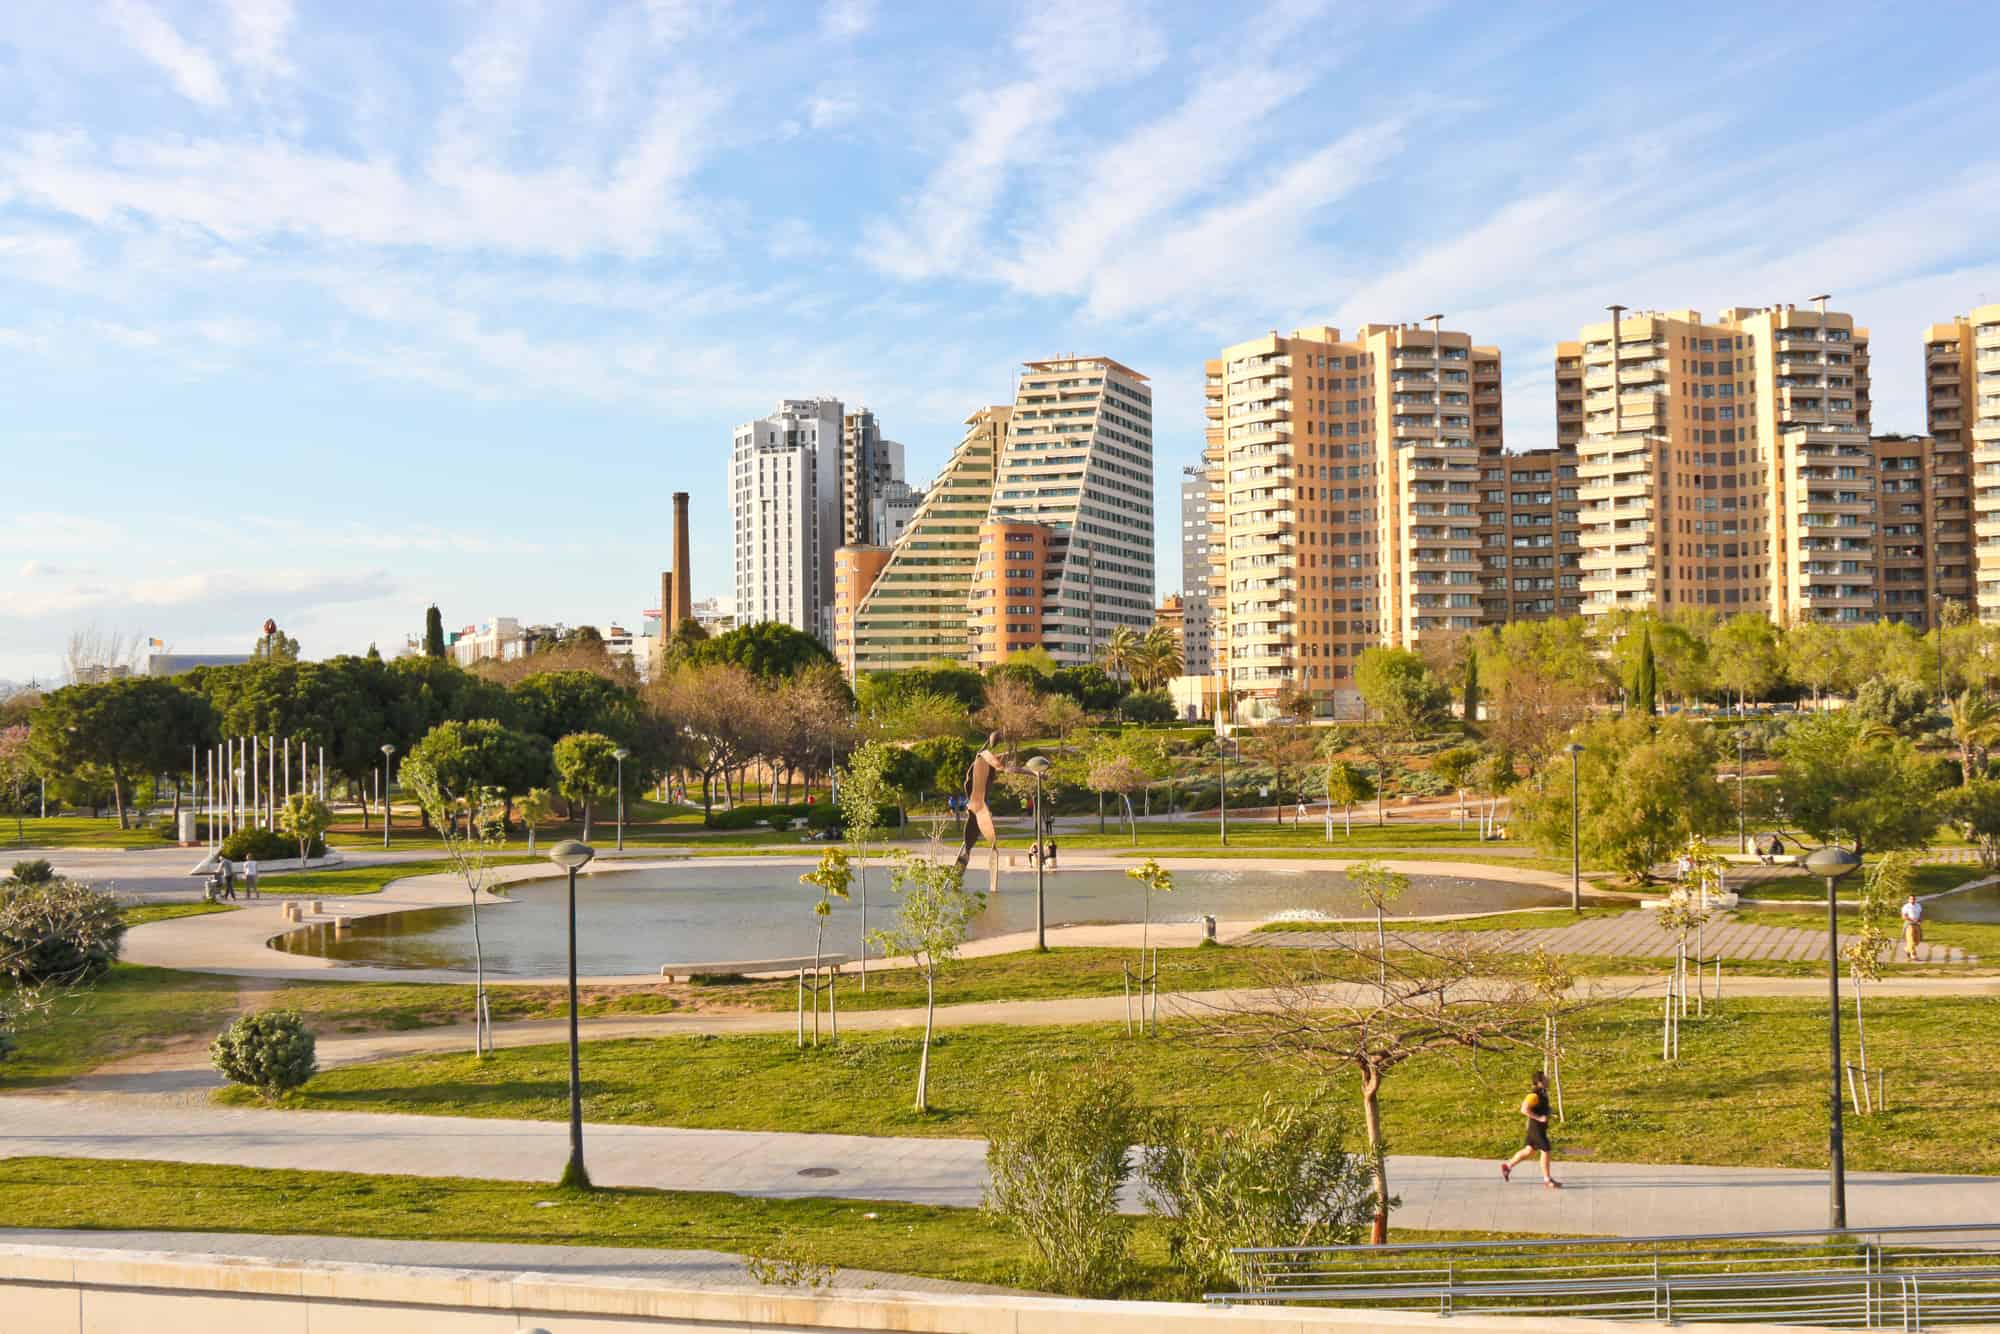 A park and a residential area in valencia